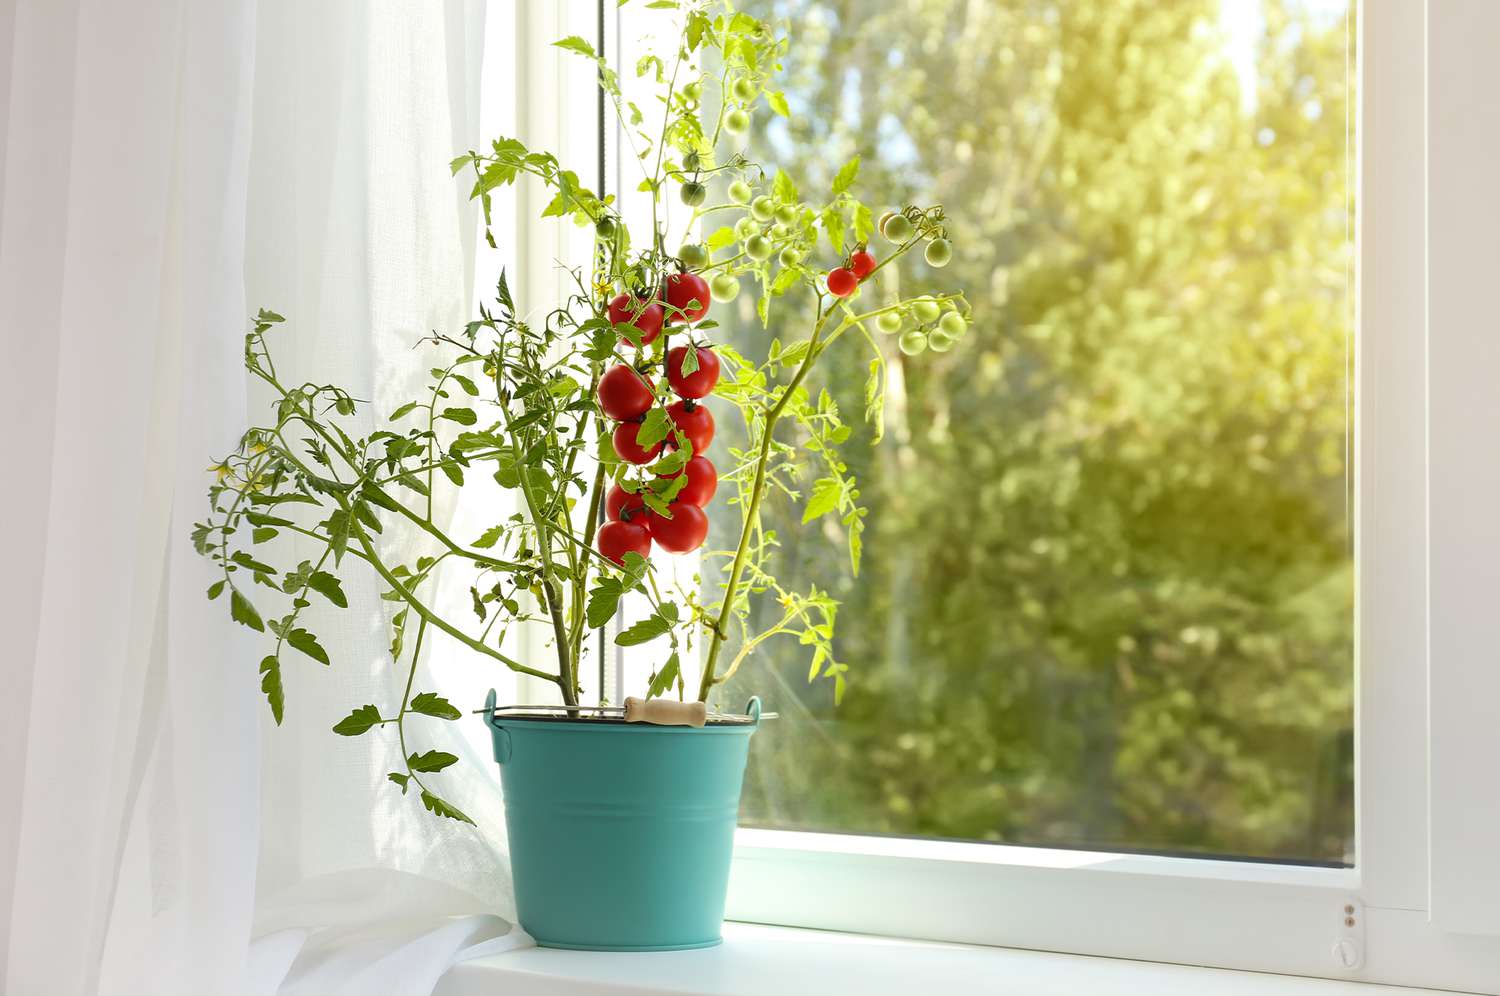 How to Grow Tomatoes Indoors for Vine-Ripened Fruit Year-Round